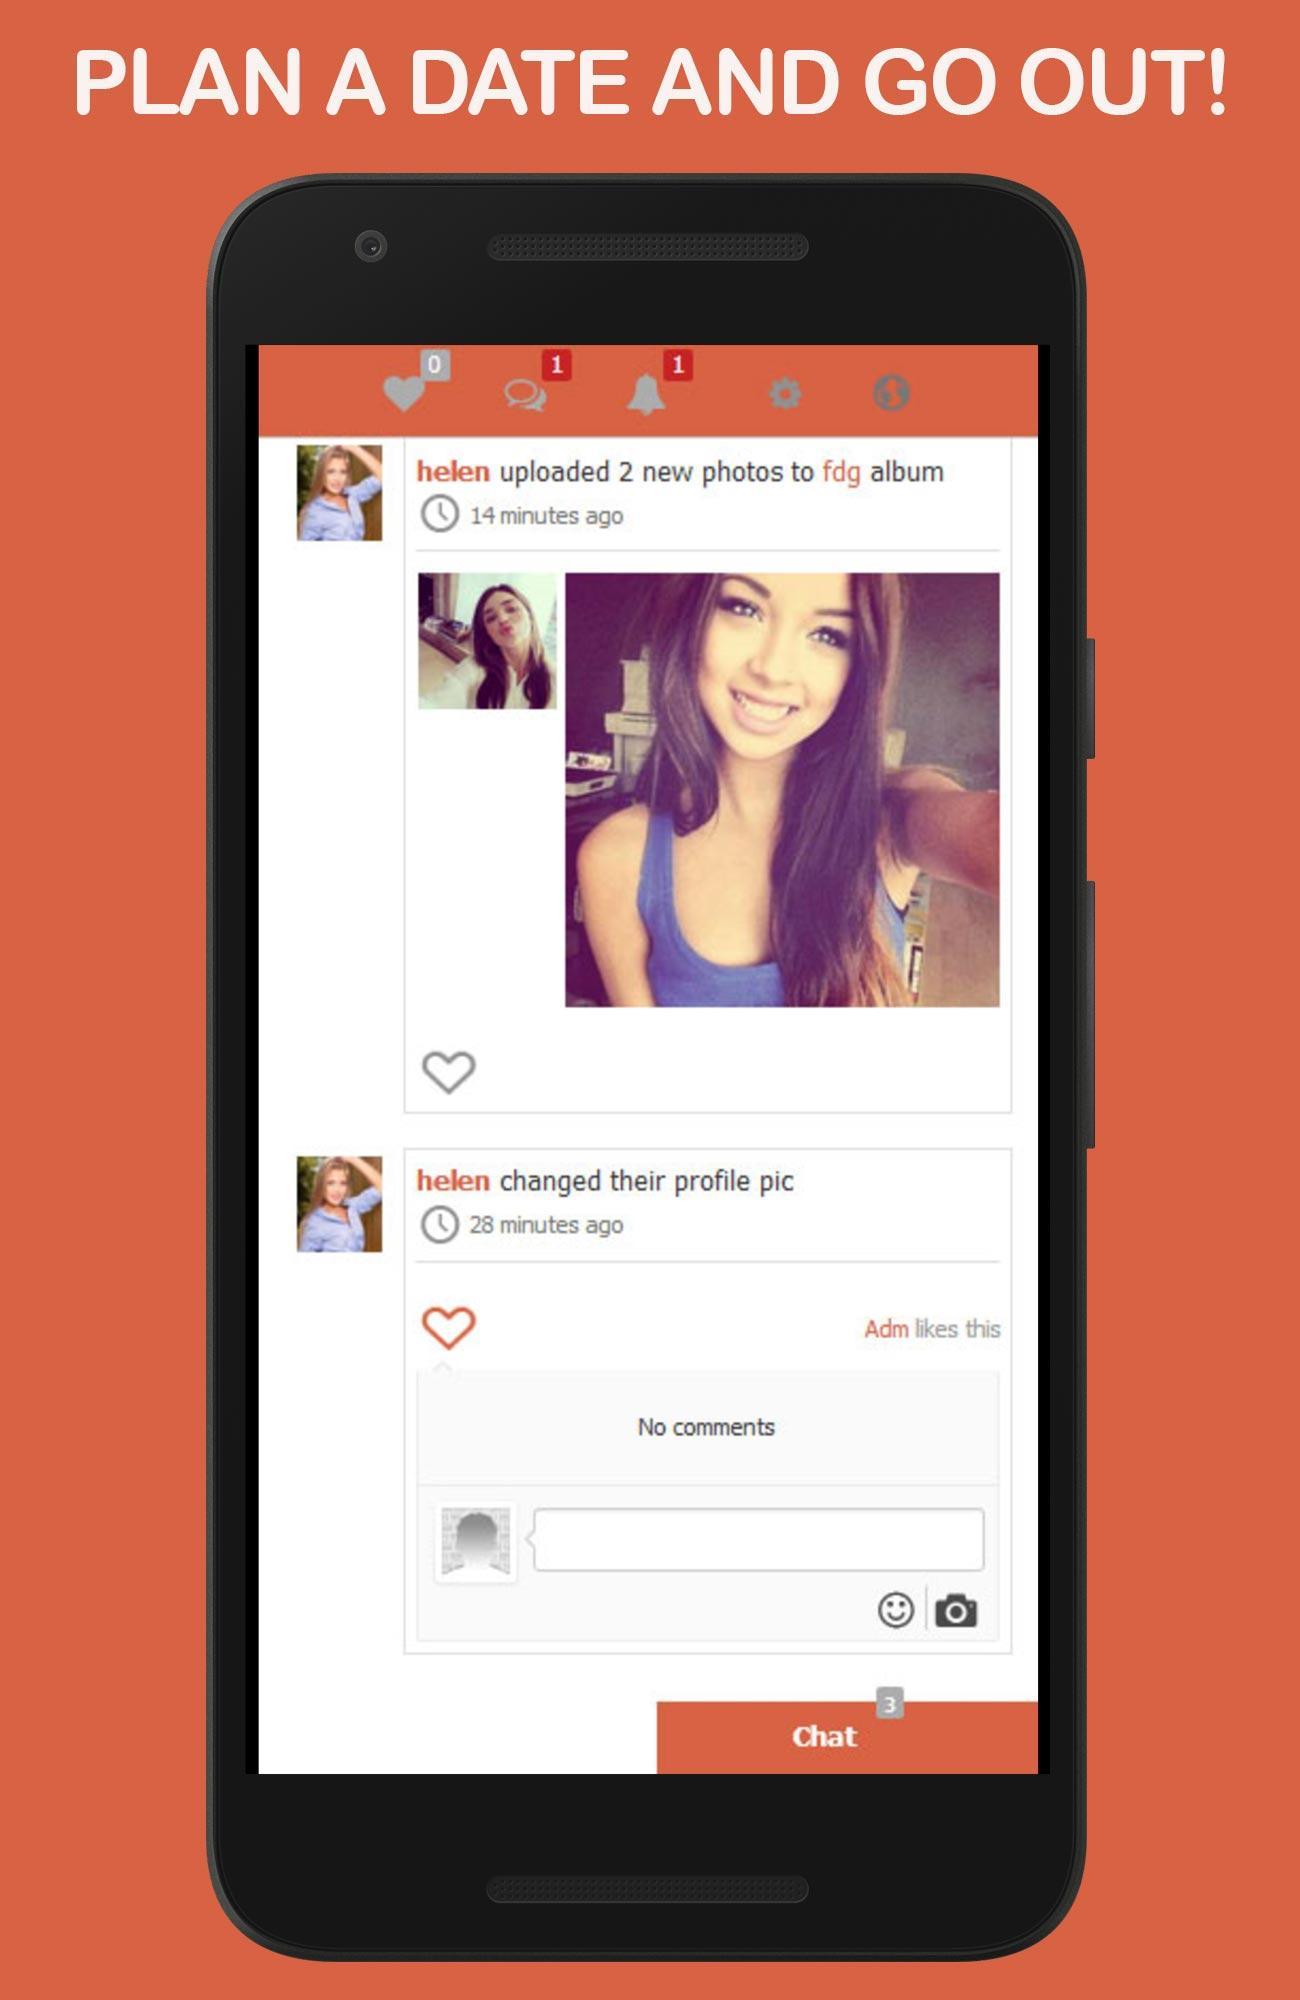 Free Dating App & Flirt Chat - Match with Singles Download APK Android | Aptoide